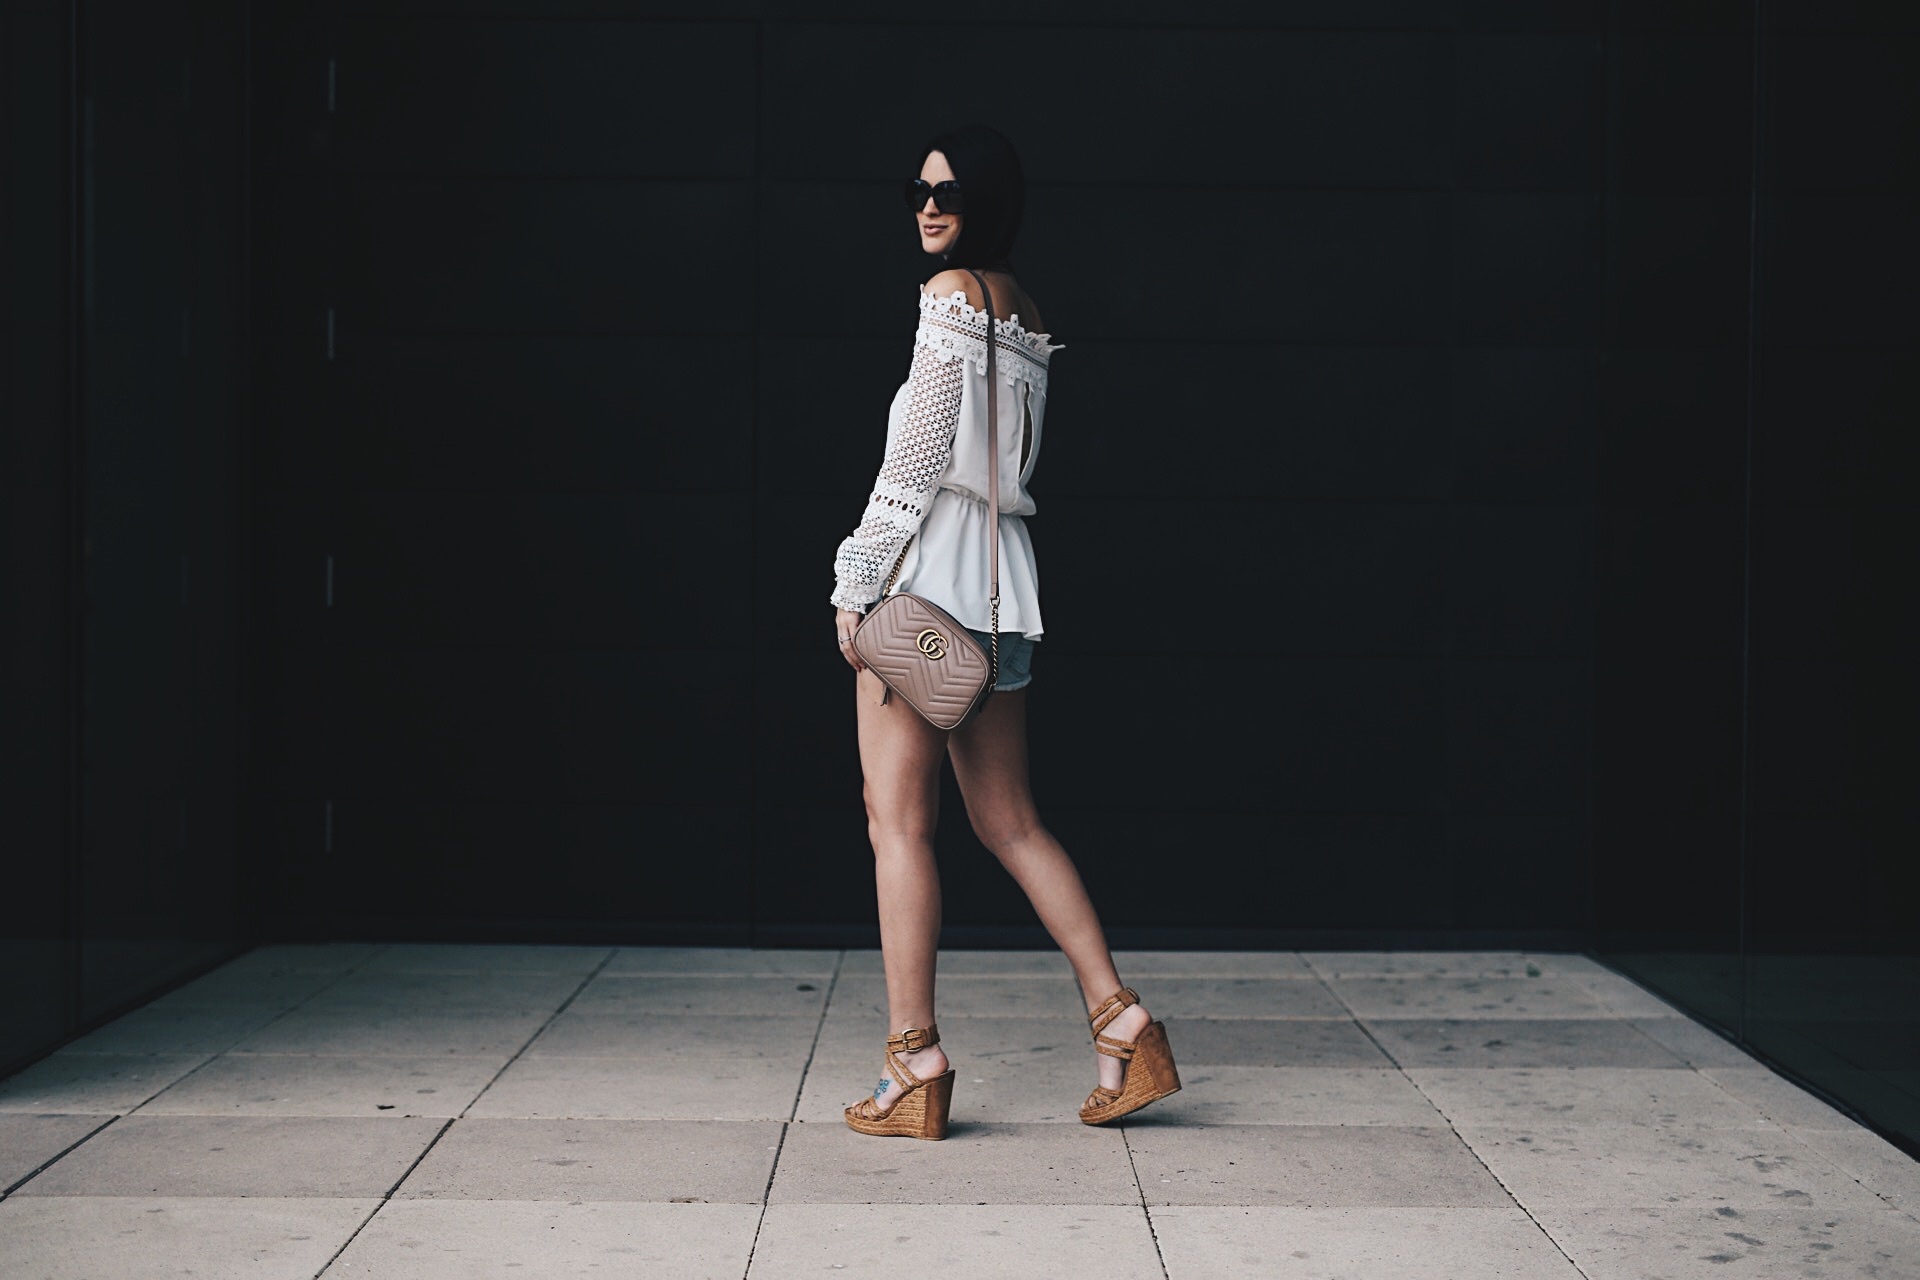 DTKAustin shows us how to wear the highly coveted off-the-shoulder trend with Chicwish, cutoff shorts and wedges from Stuart Weitzman. Want more summer inspiration? Click to get more details!